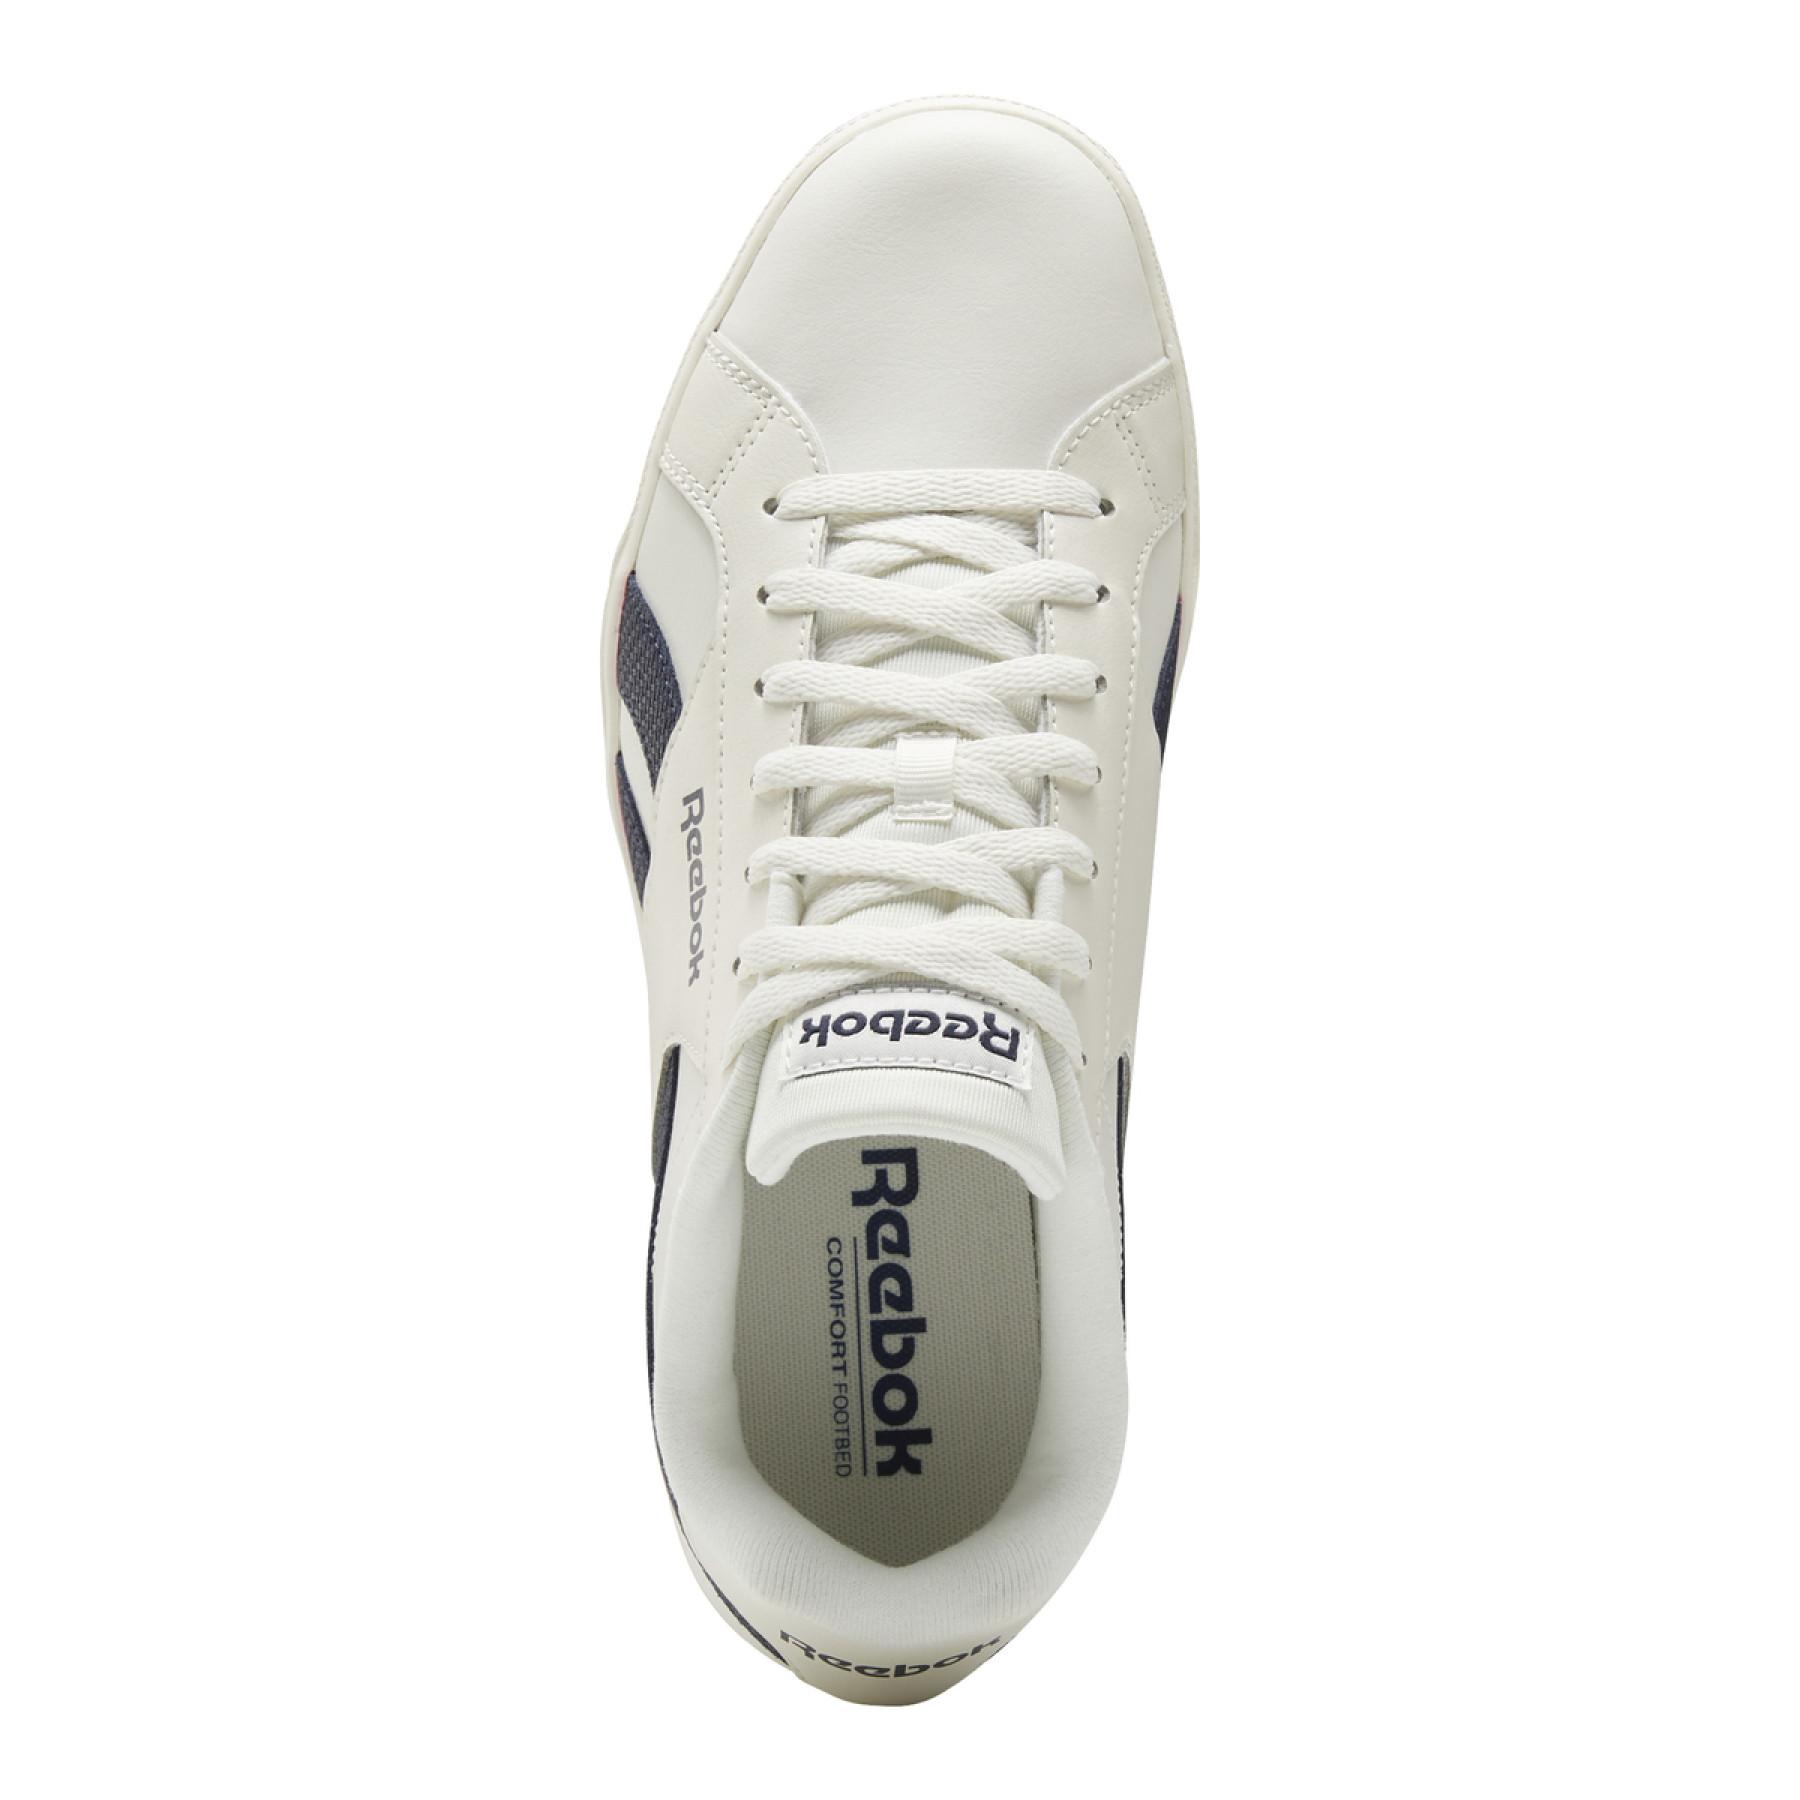 Sneakers Reebok Classics Royal Complete 3.0 Low